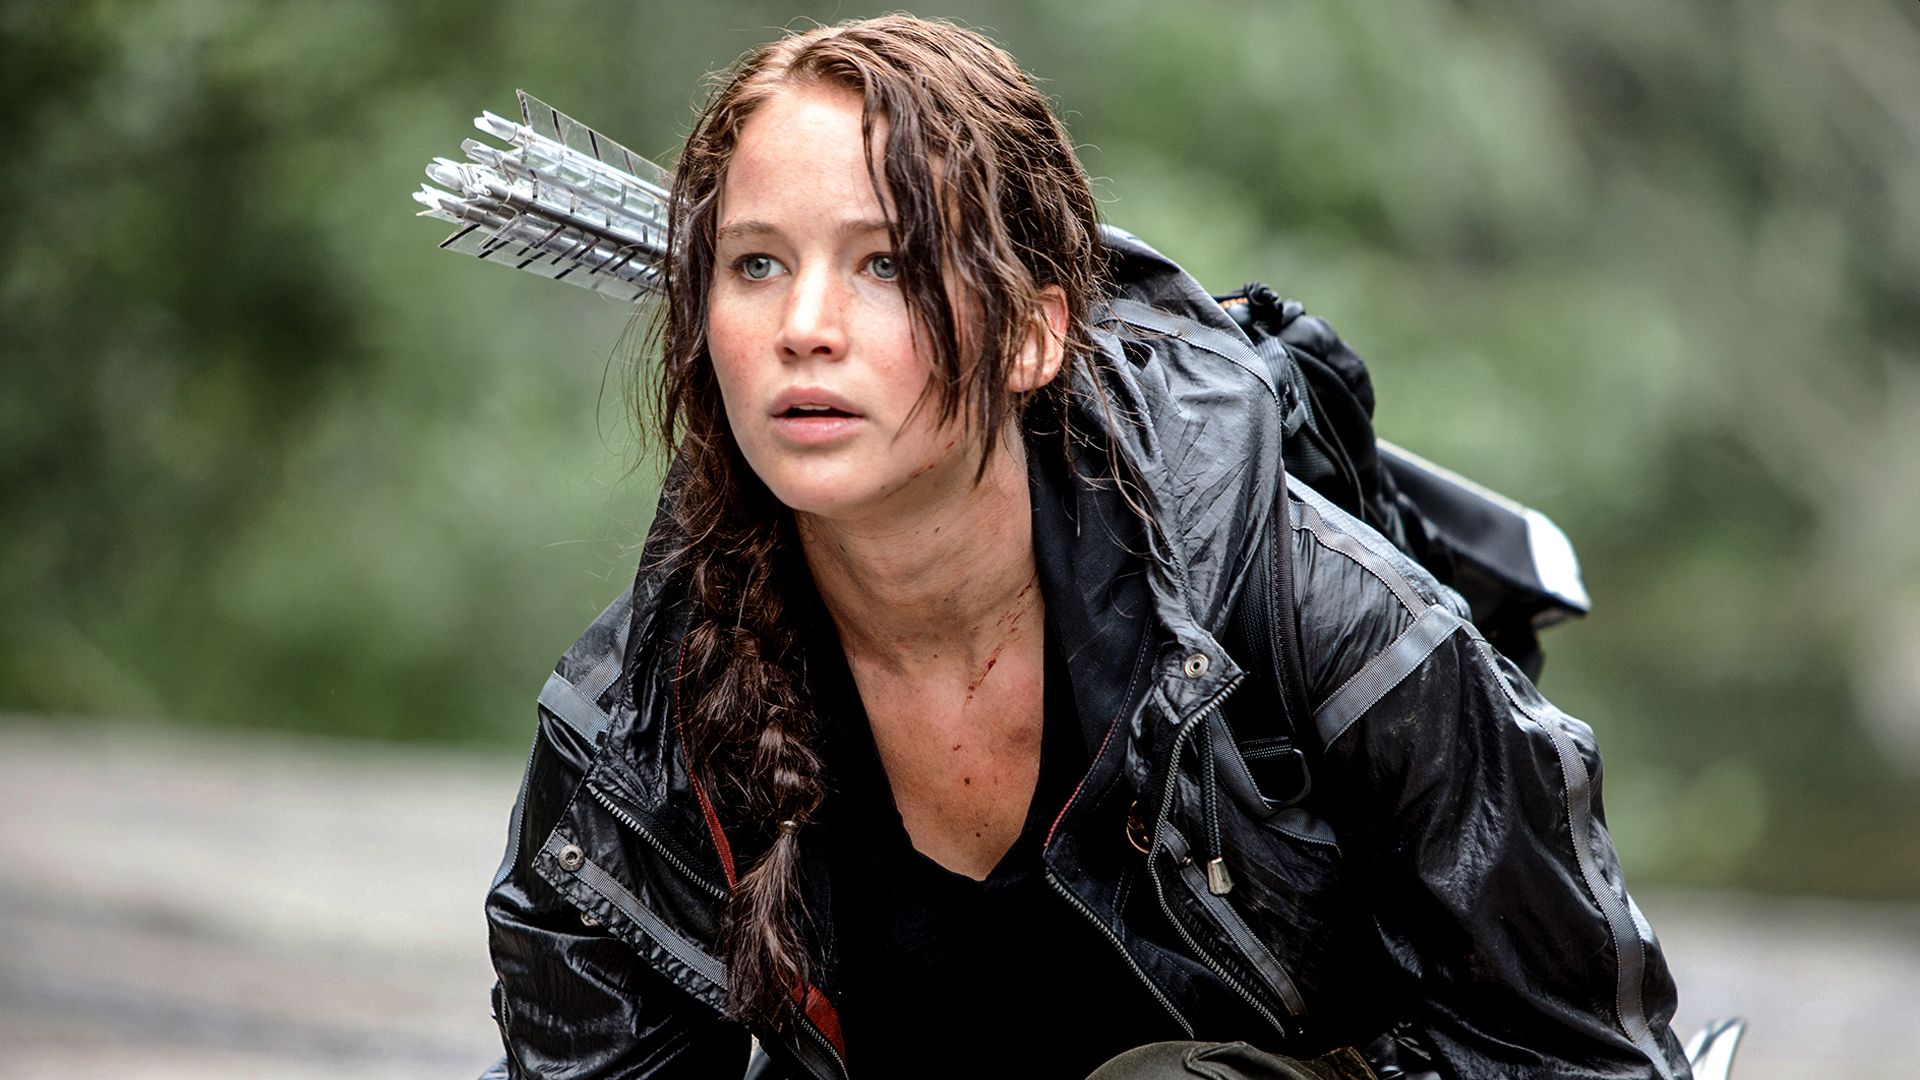 The actress was only 23 years old when the accident occurred.  (Photo courtesy of Lionsgate)